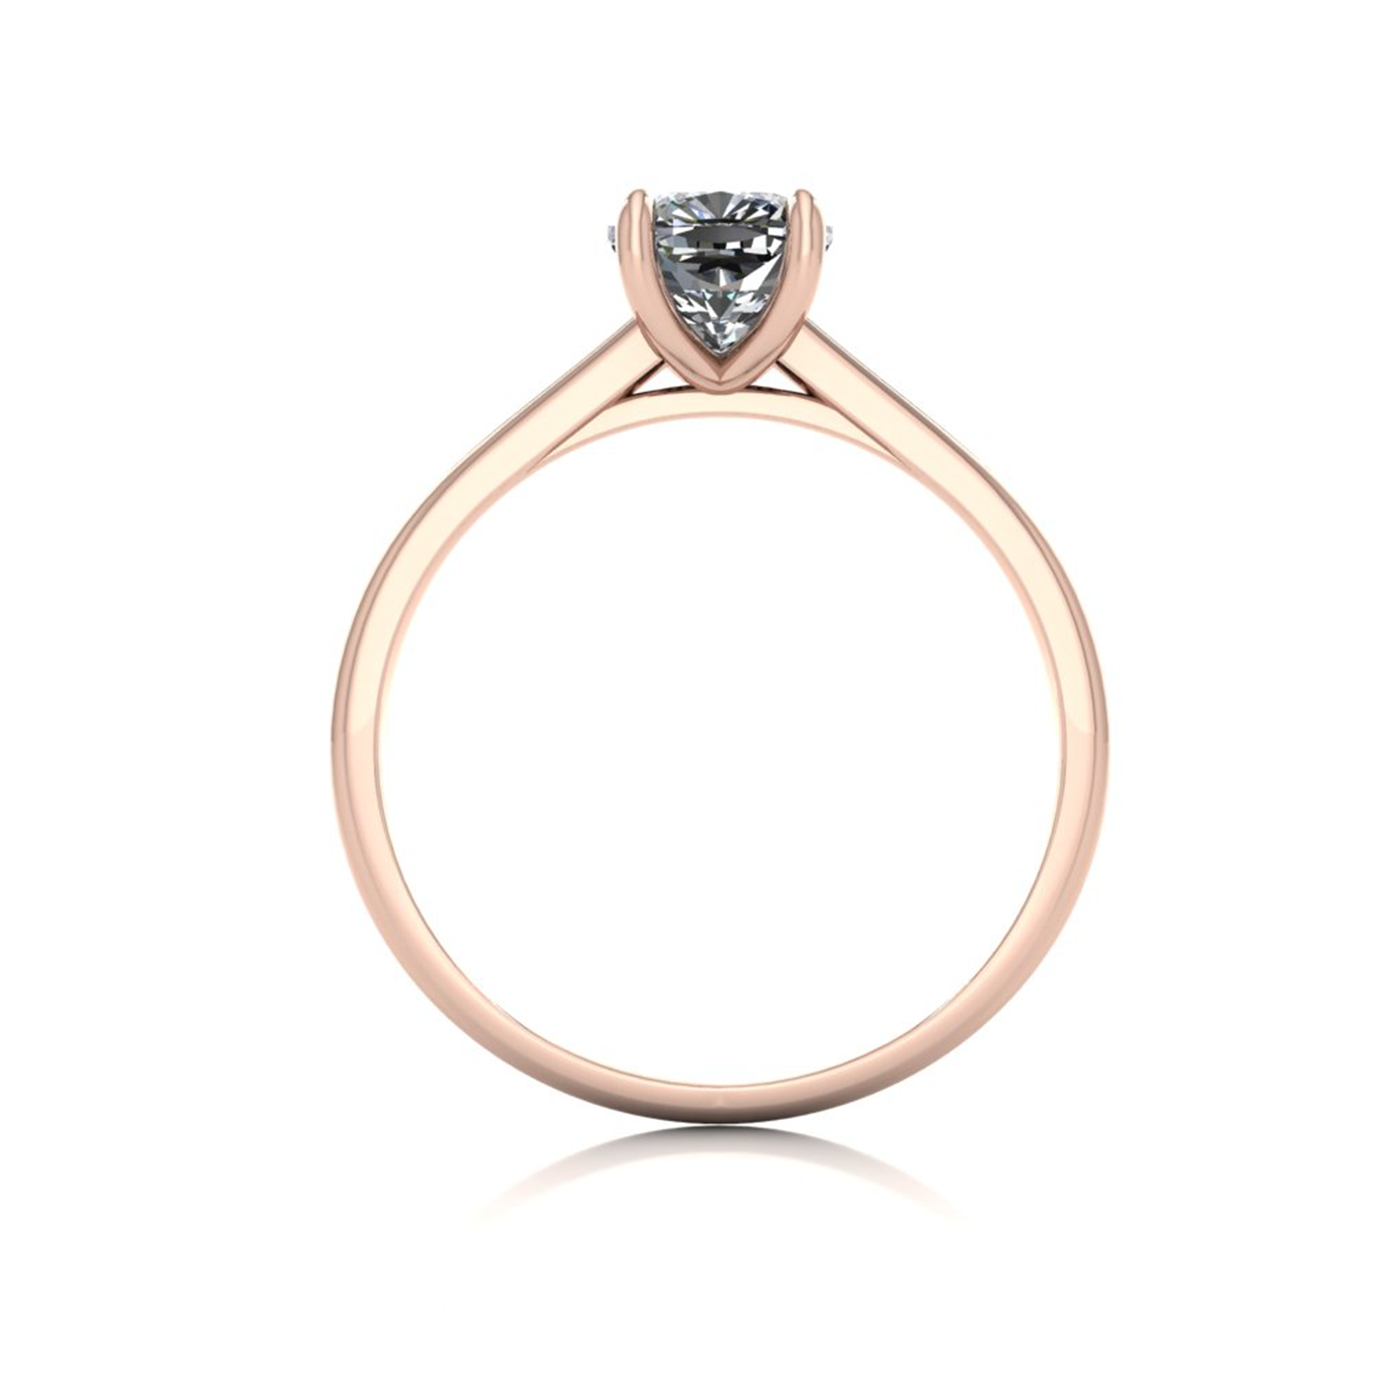 18K ROSE GOLD 4 PRONGS SOLITAIRE CUSHION CUT DIAMOND ENGAGEMENT RING WITH WHISPER THIN BAND